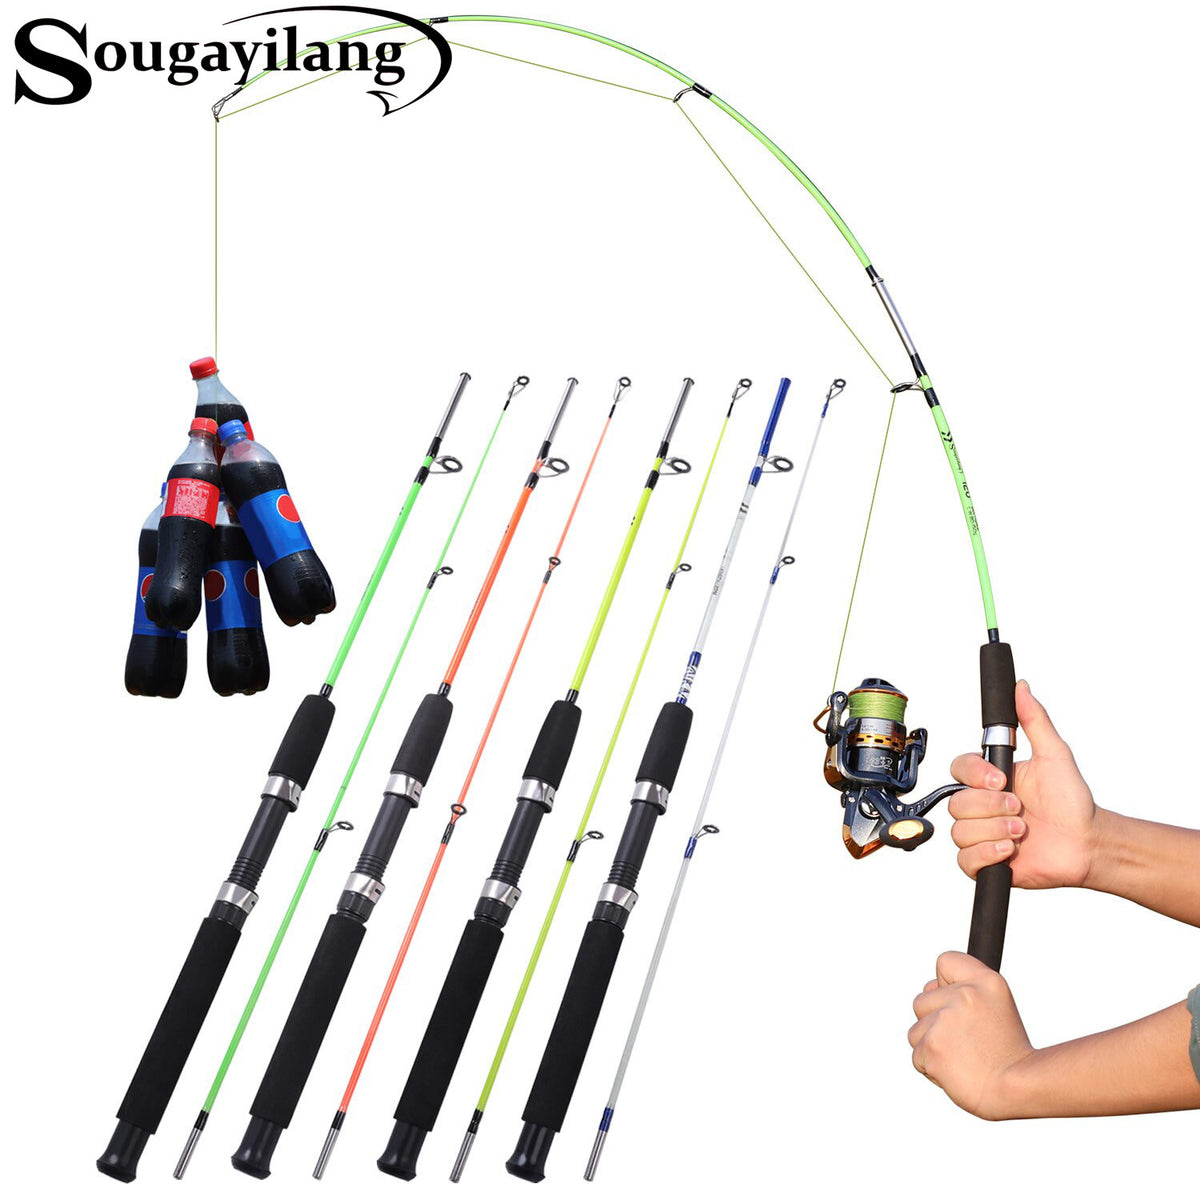 Sougayilang 4 Color 1.2m Spinning Lure Fishing Rod EVA Handle Ultralight  ABS Resin Body Boat Rod Travel Fishing Pole Pesca